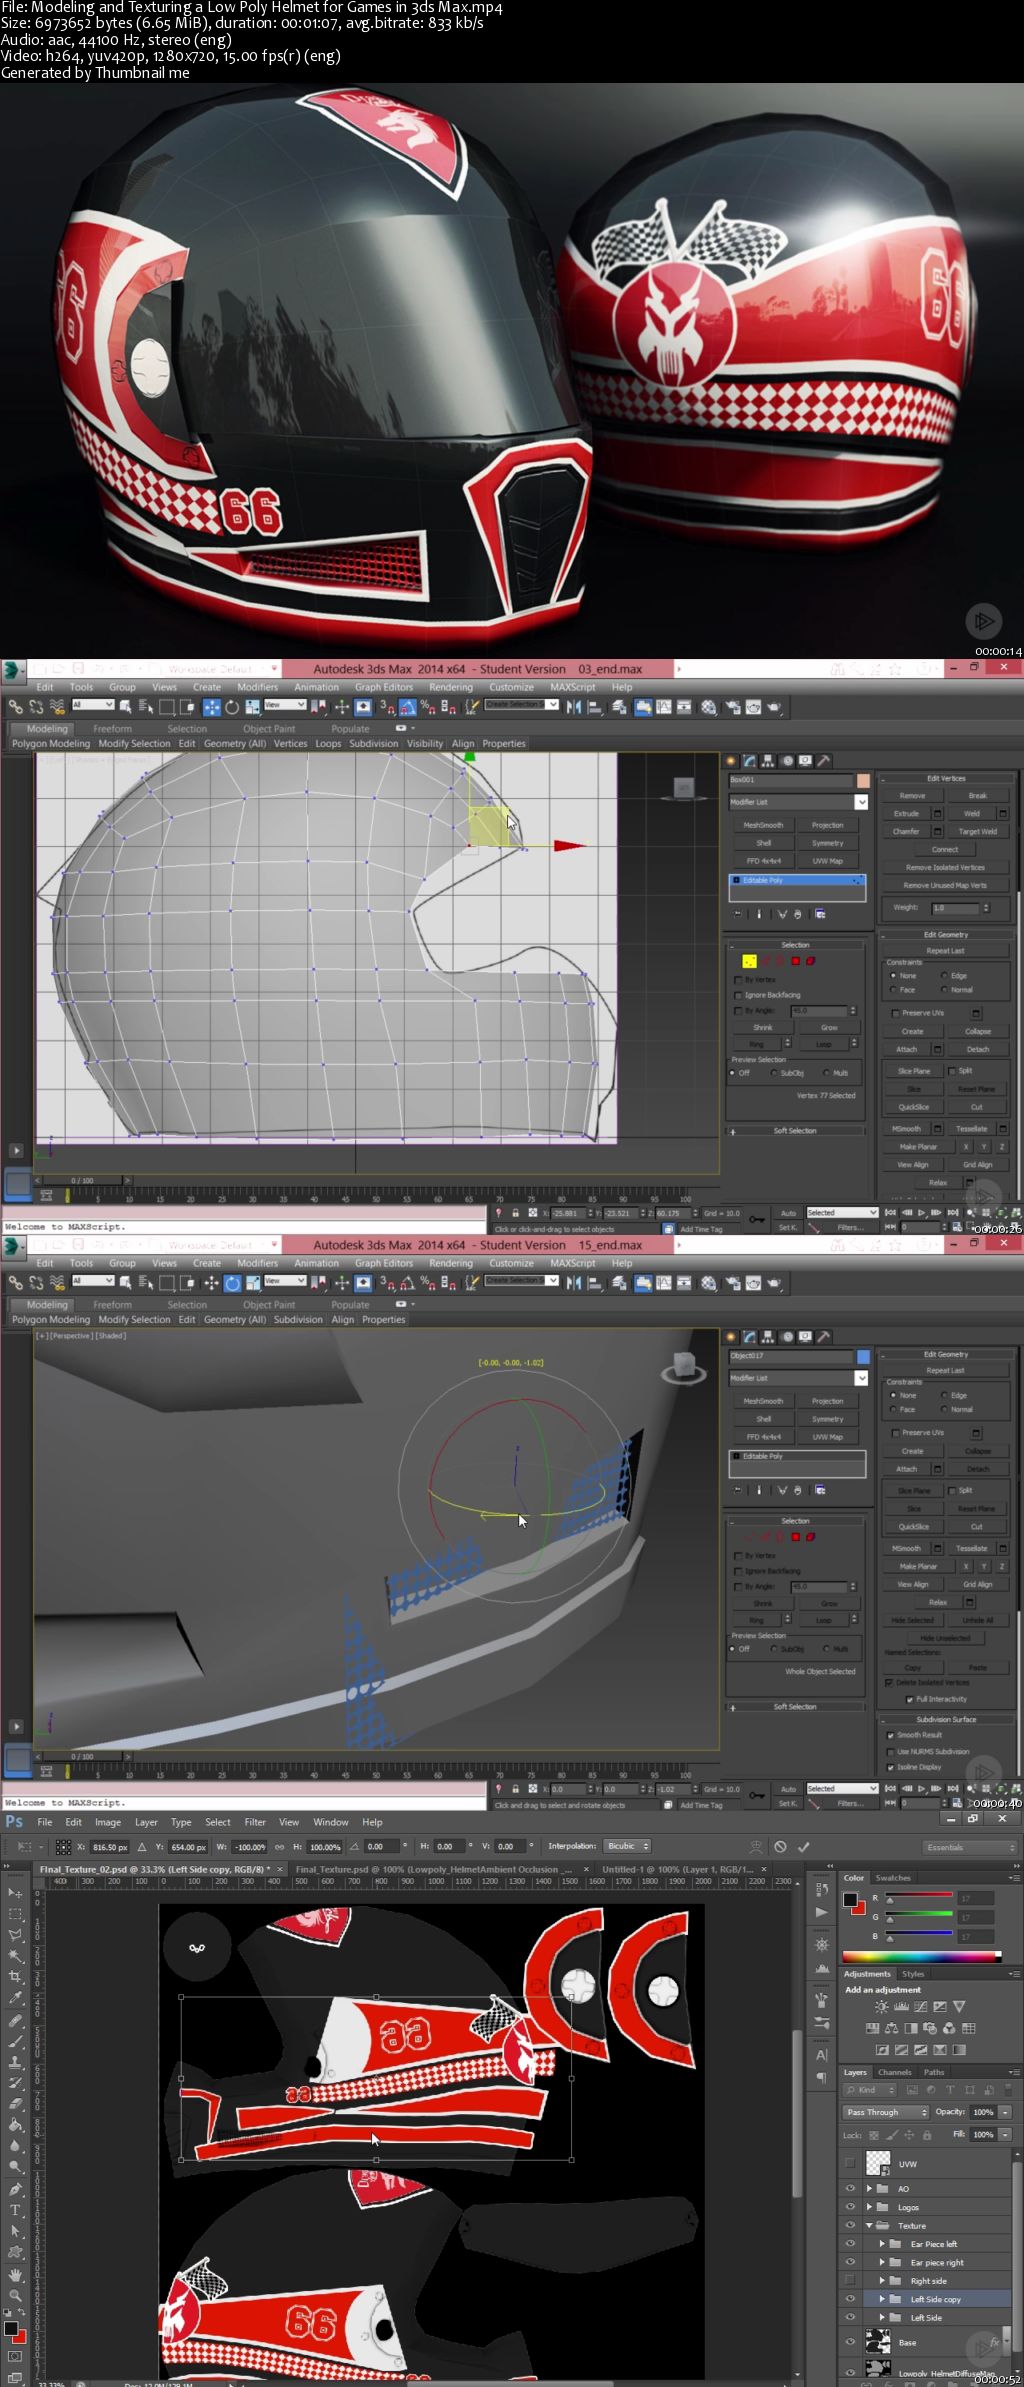 Pxxx - Modeling and Texturing a Low Poly Helmet for Games in 3ds Max